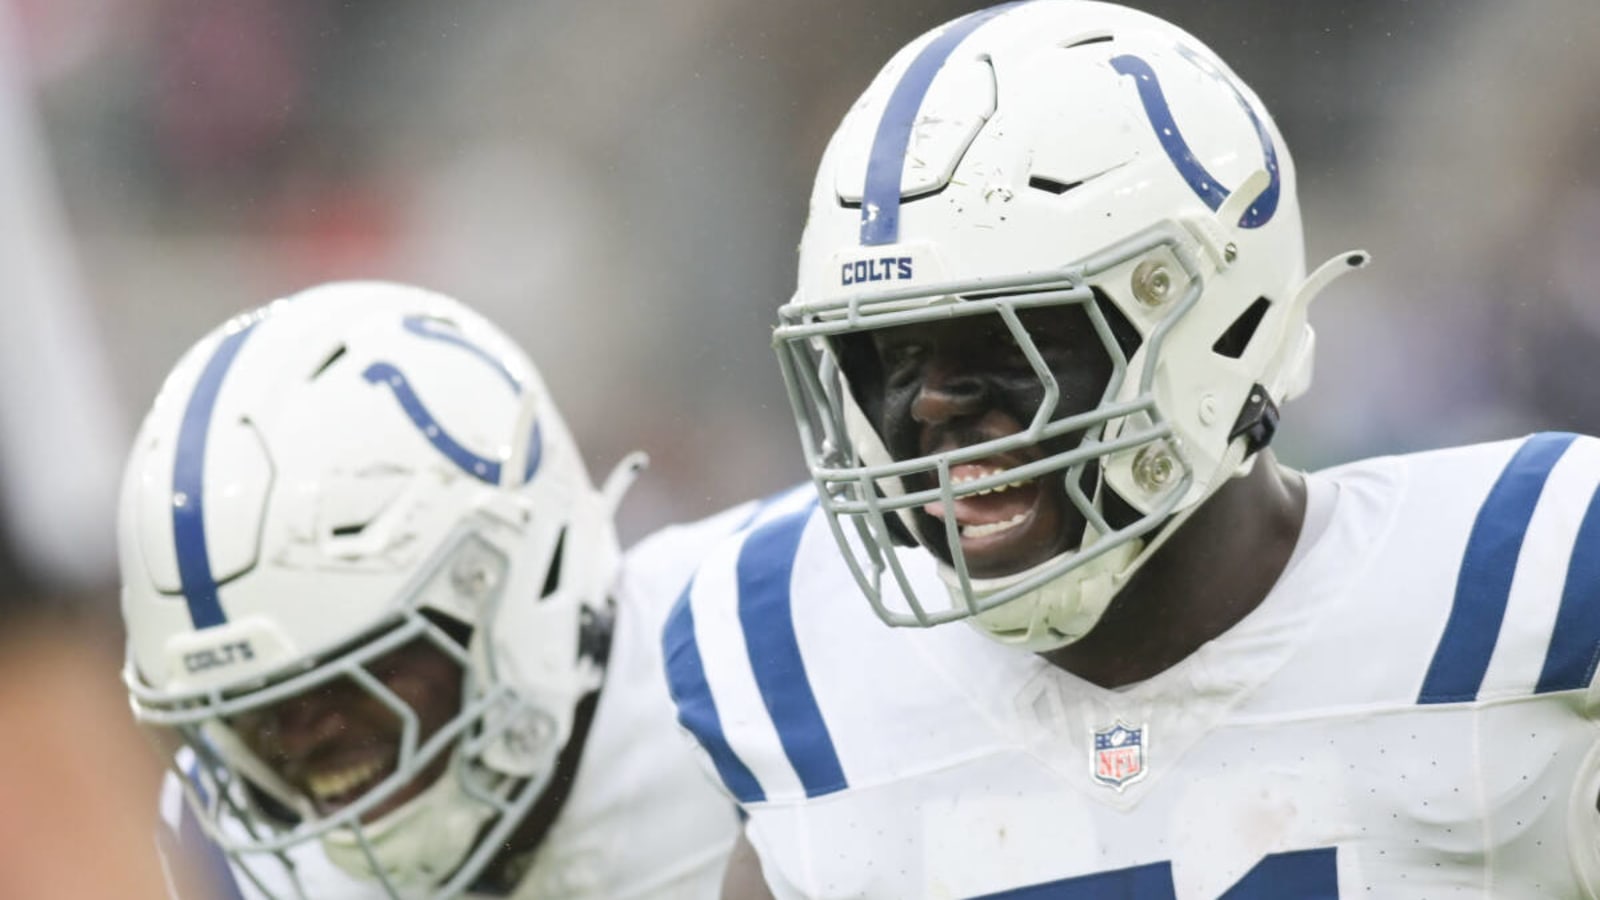 The Colts made a big decision on a young player&#39;s future with the team